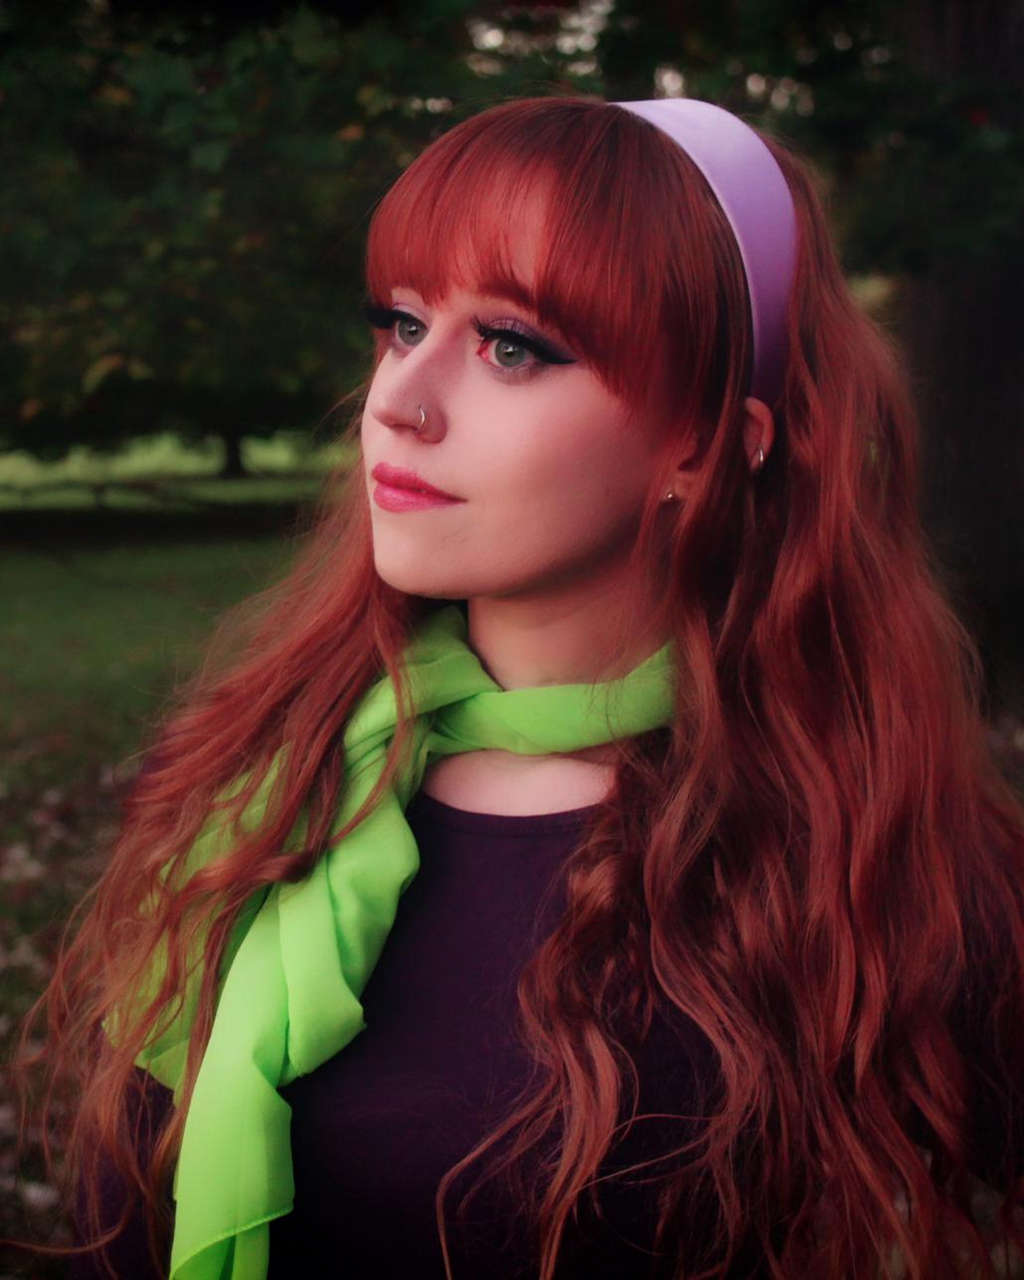 Daphne Blake From Scooby Doo By Astroani